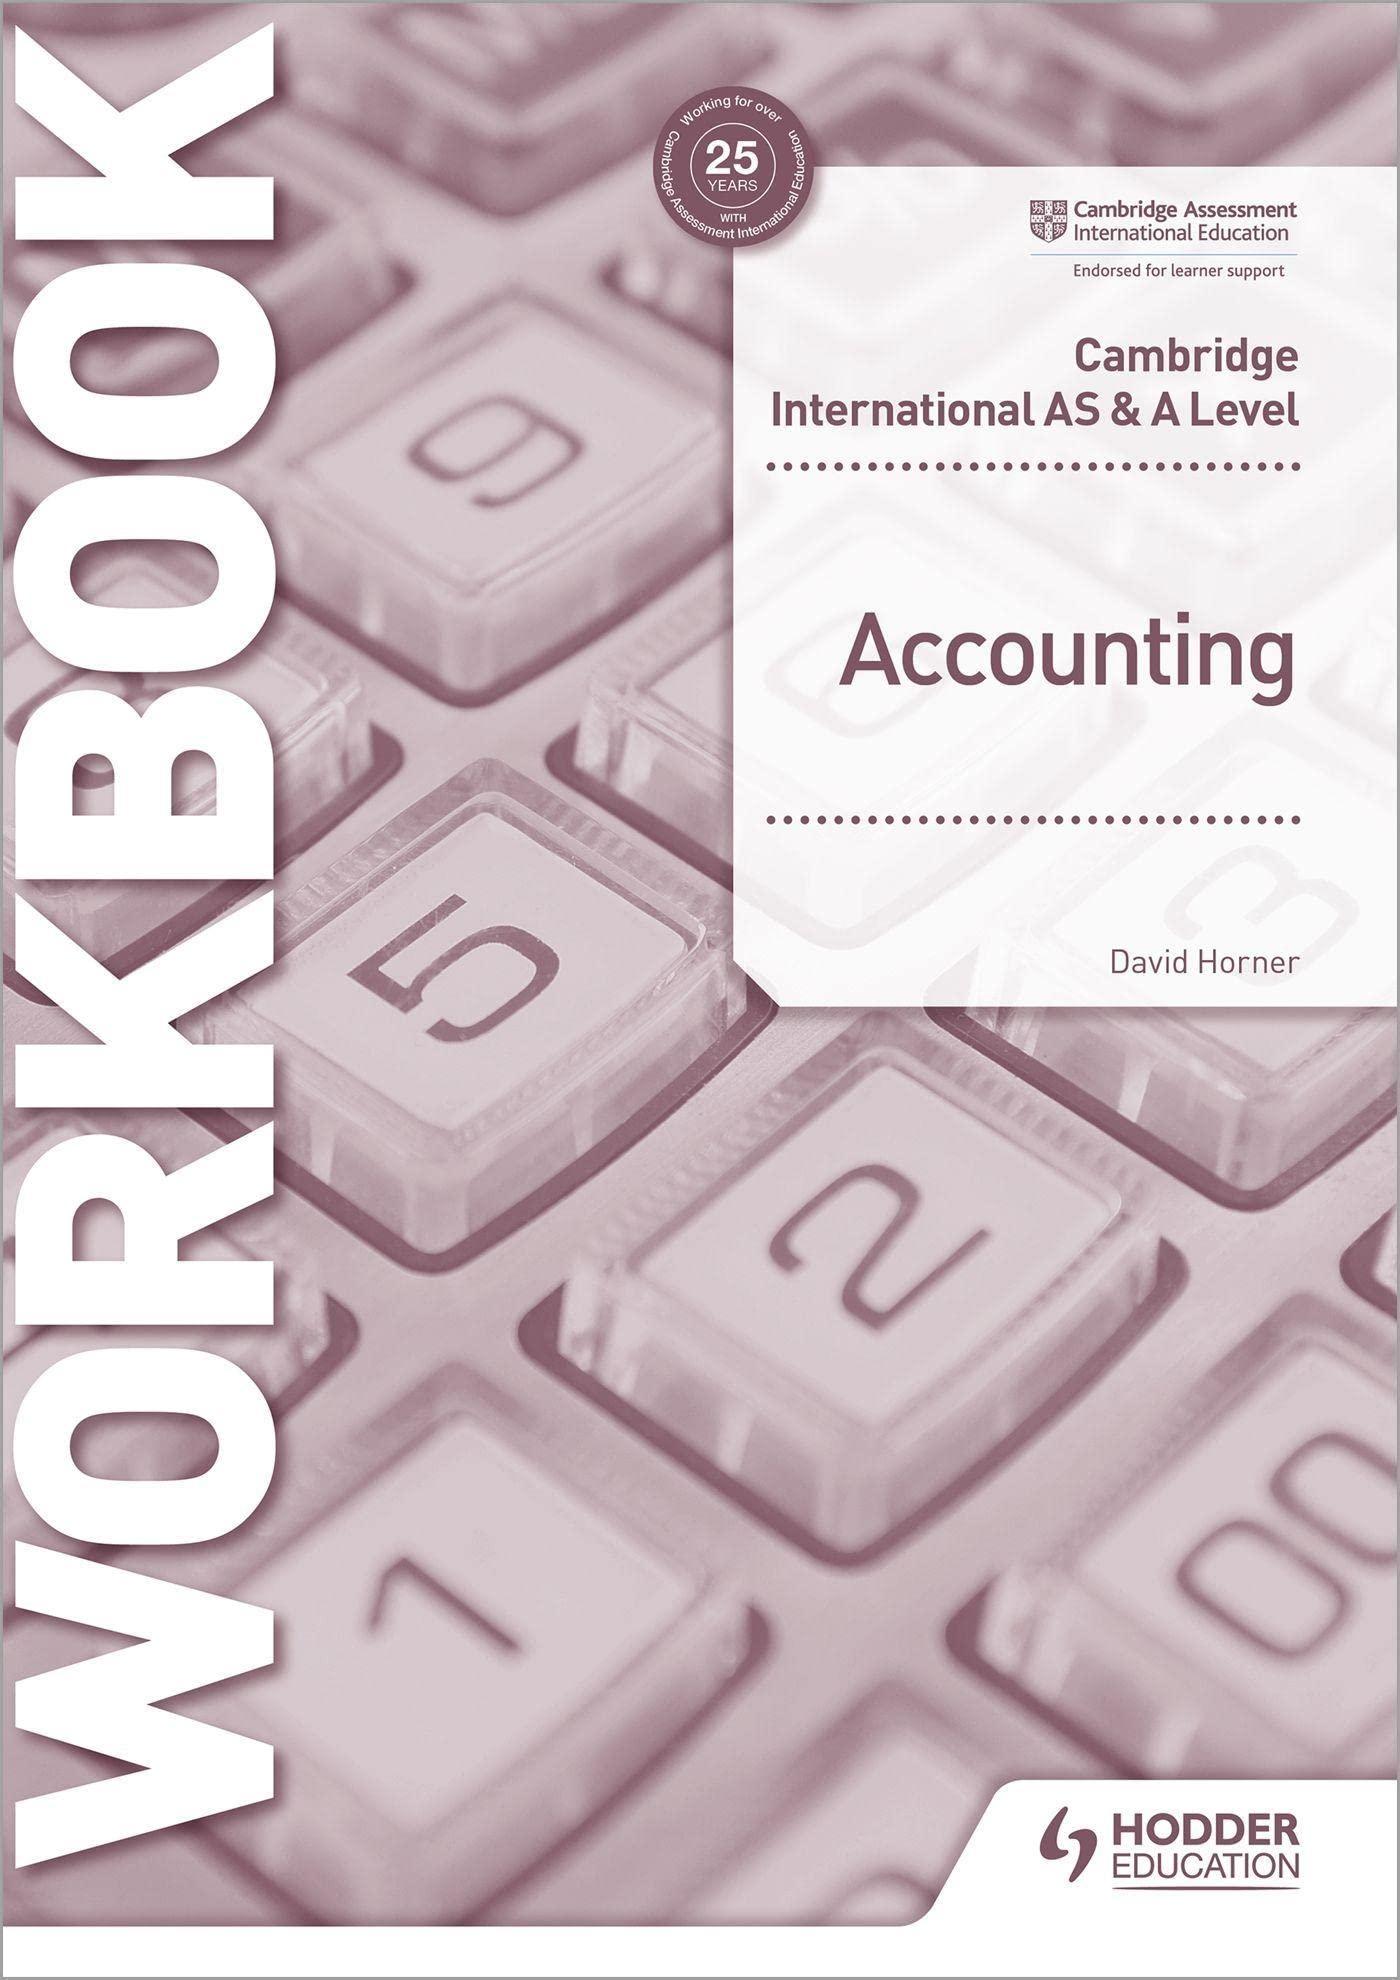 cambridge international as and a level accounting workbook 1st edition david horner 1398317543, 978-1398317543